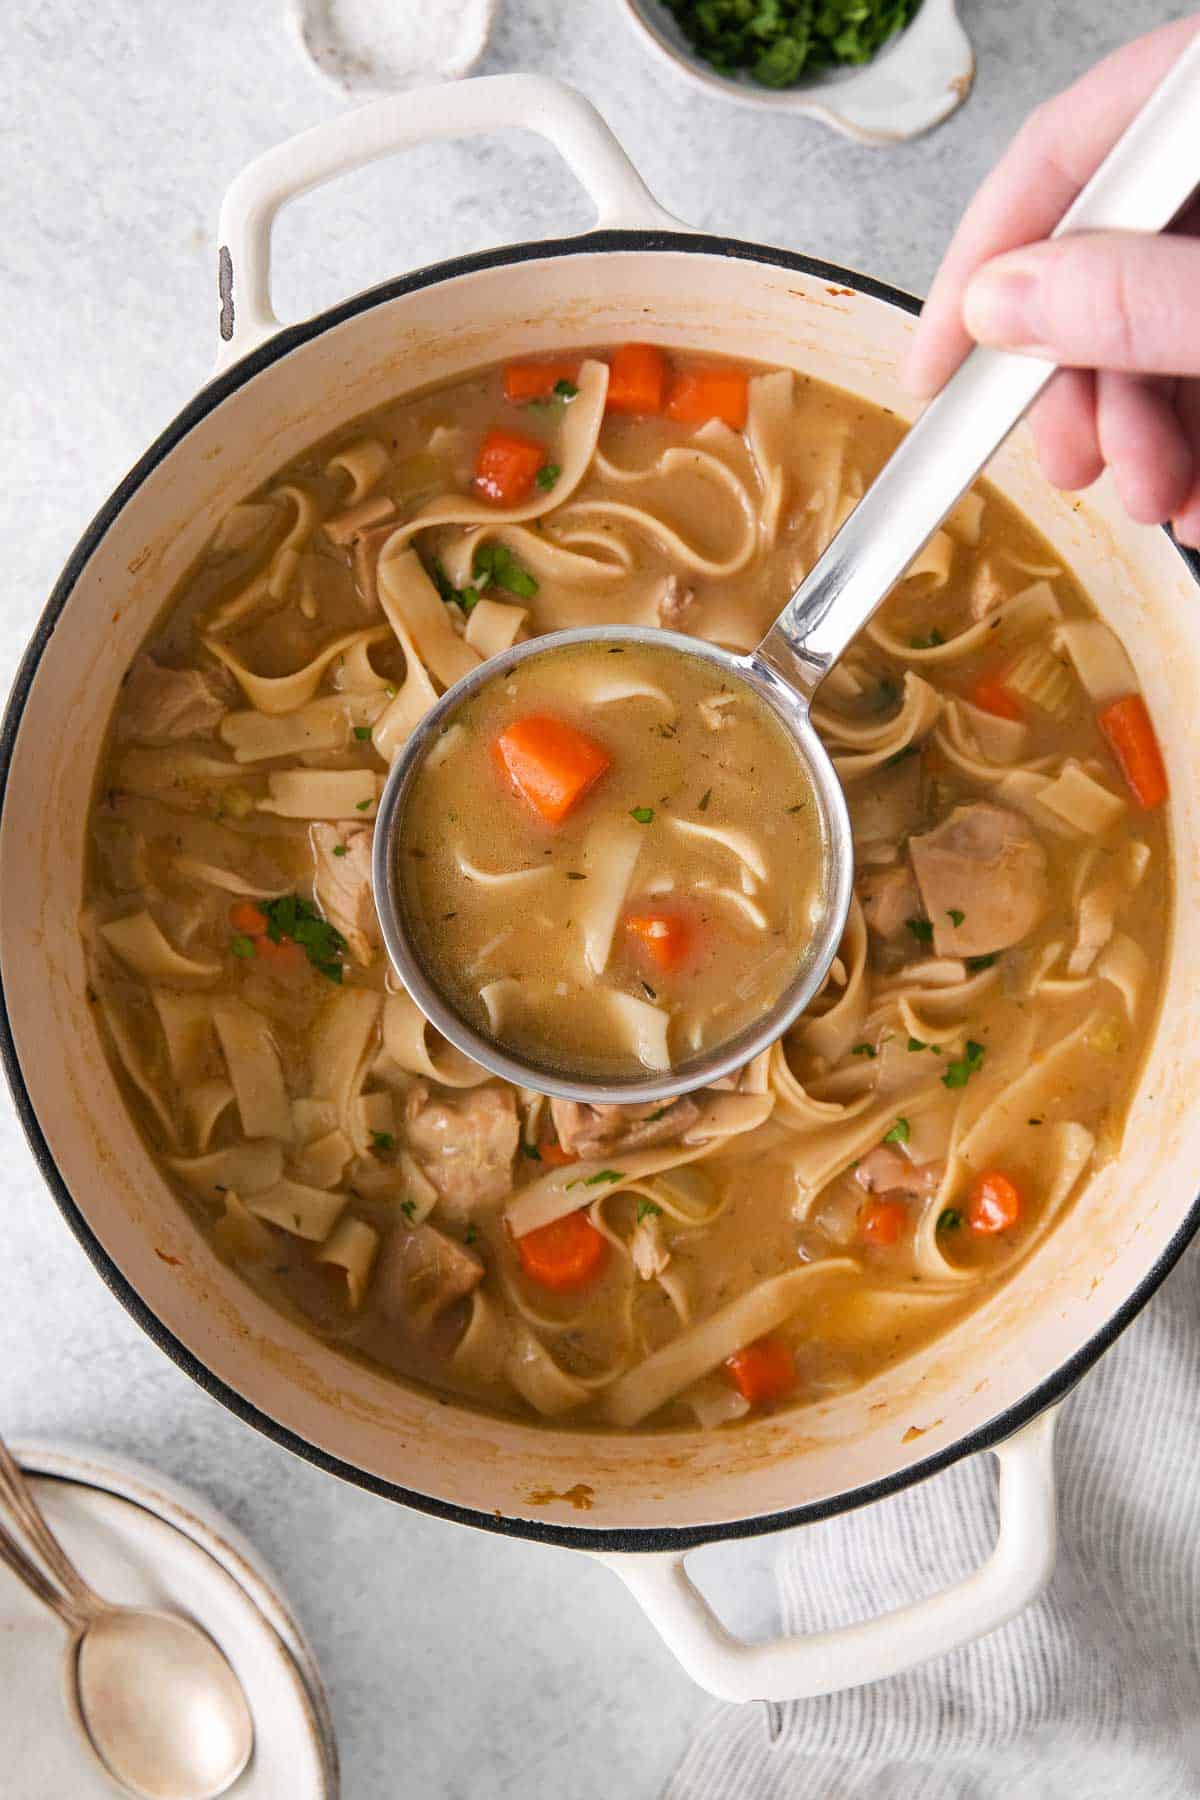 Gluten-free chicken noodle soup in a pot with a ladle scooping out a portion